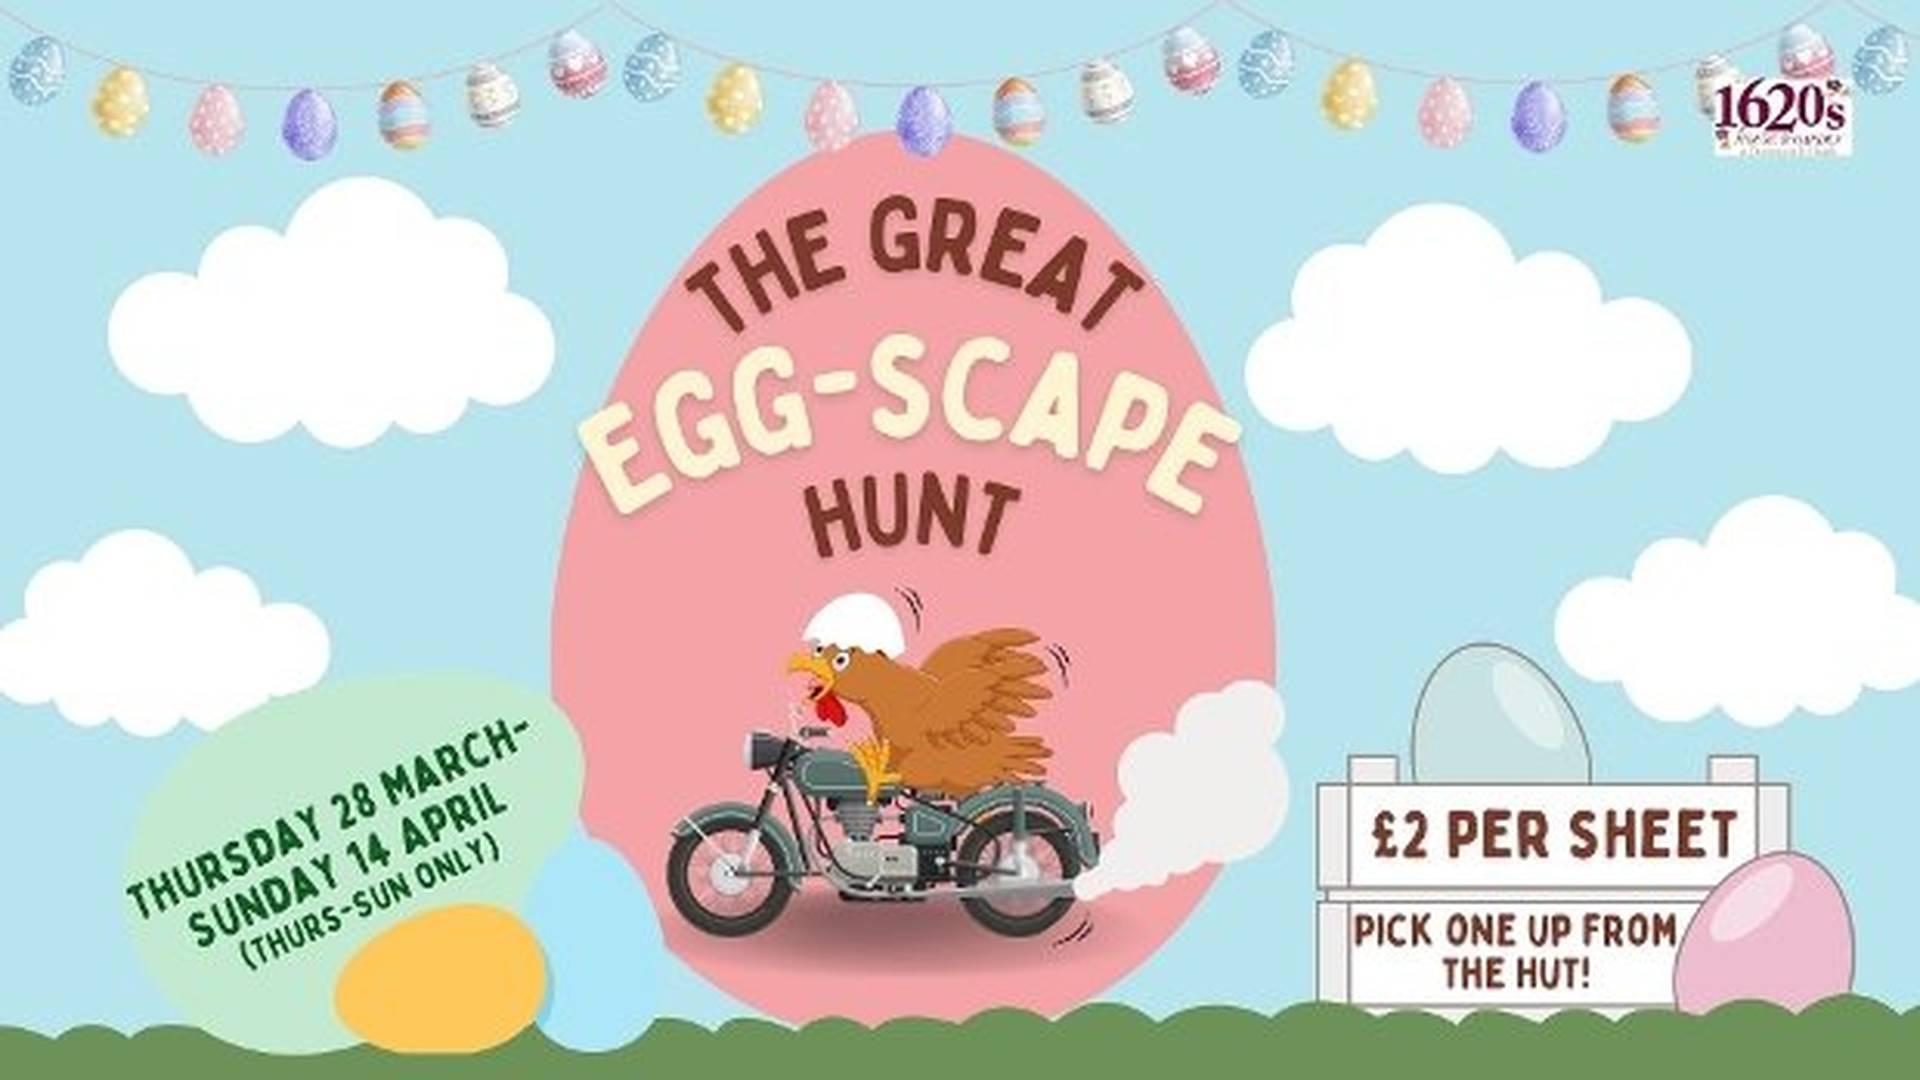 The Great Egg-Scape Hunt photo